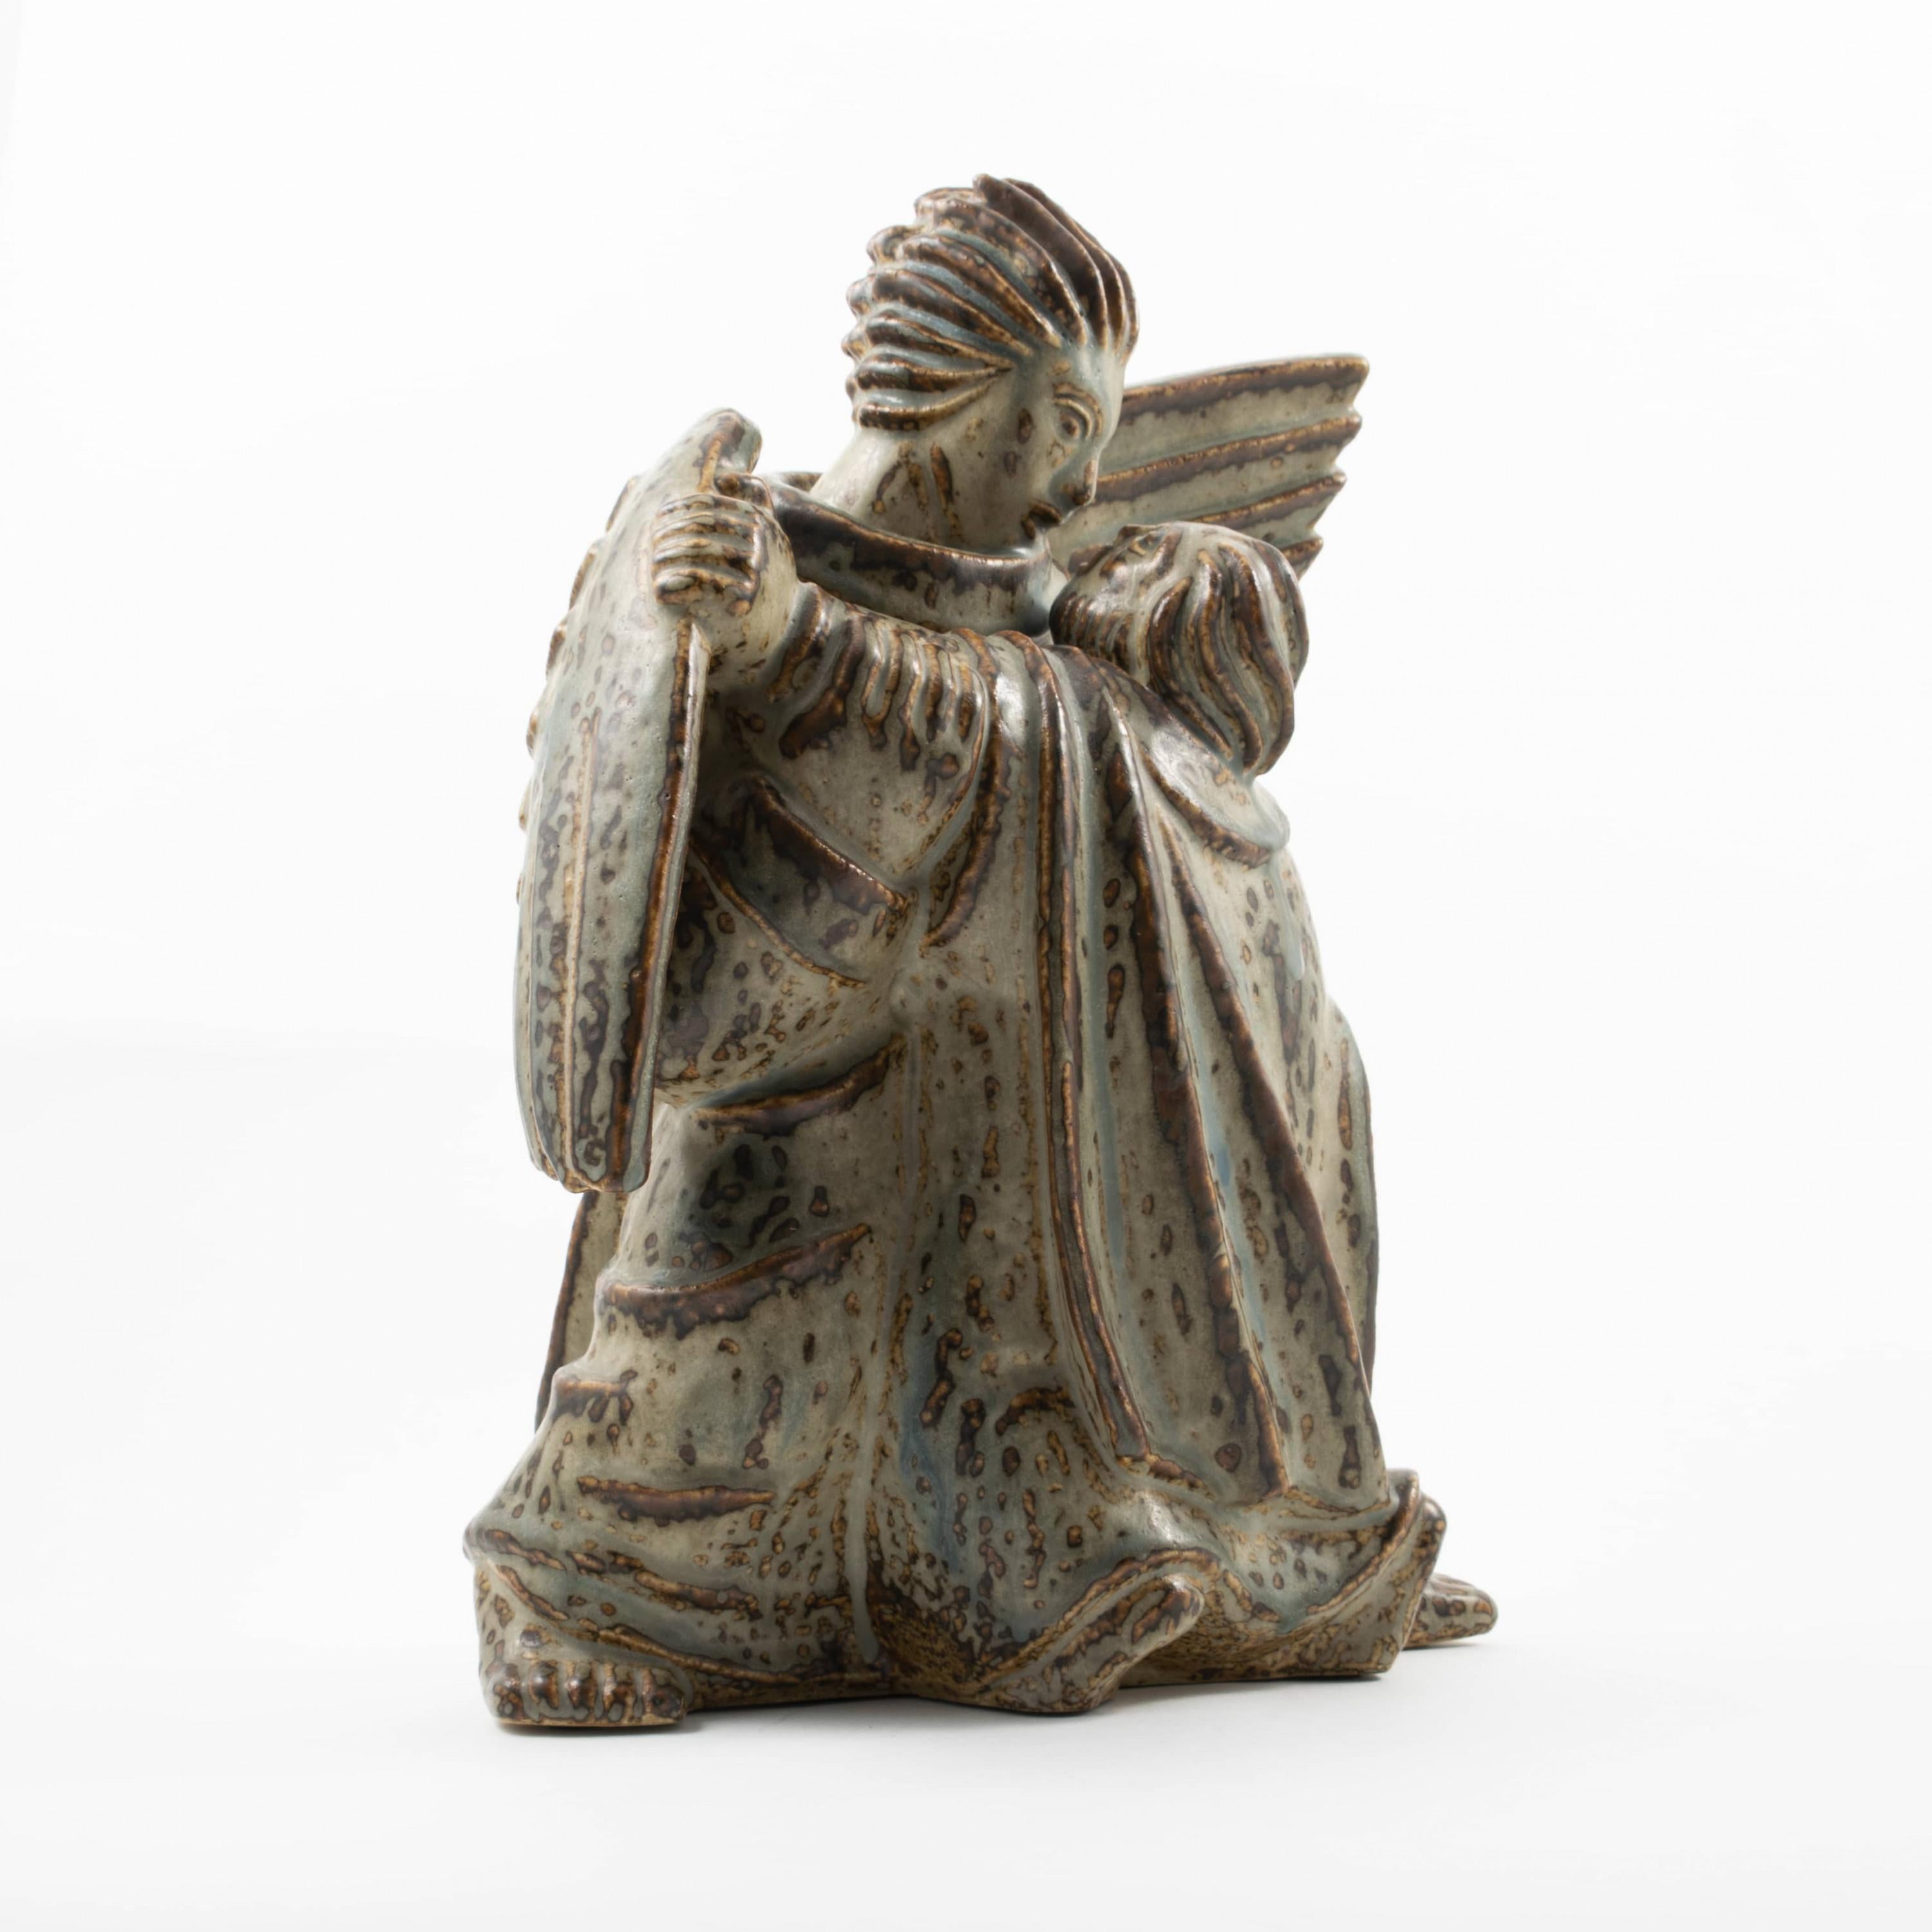 Jais Nielsen (1885-1961 ) for Royal Copenhagen.
'Jacobs Kamp med Englen' (Jacob wrestling with the angel), stoneware figure decorated with drip glaze in grey-blue and earth tones.
Signed Jais, no. 20196 and Royal Copenhagen marks.
Jais Nielsen